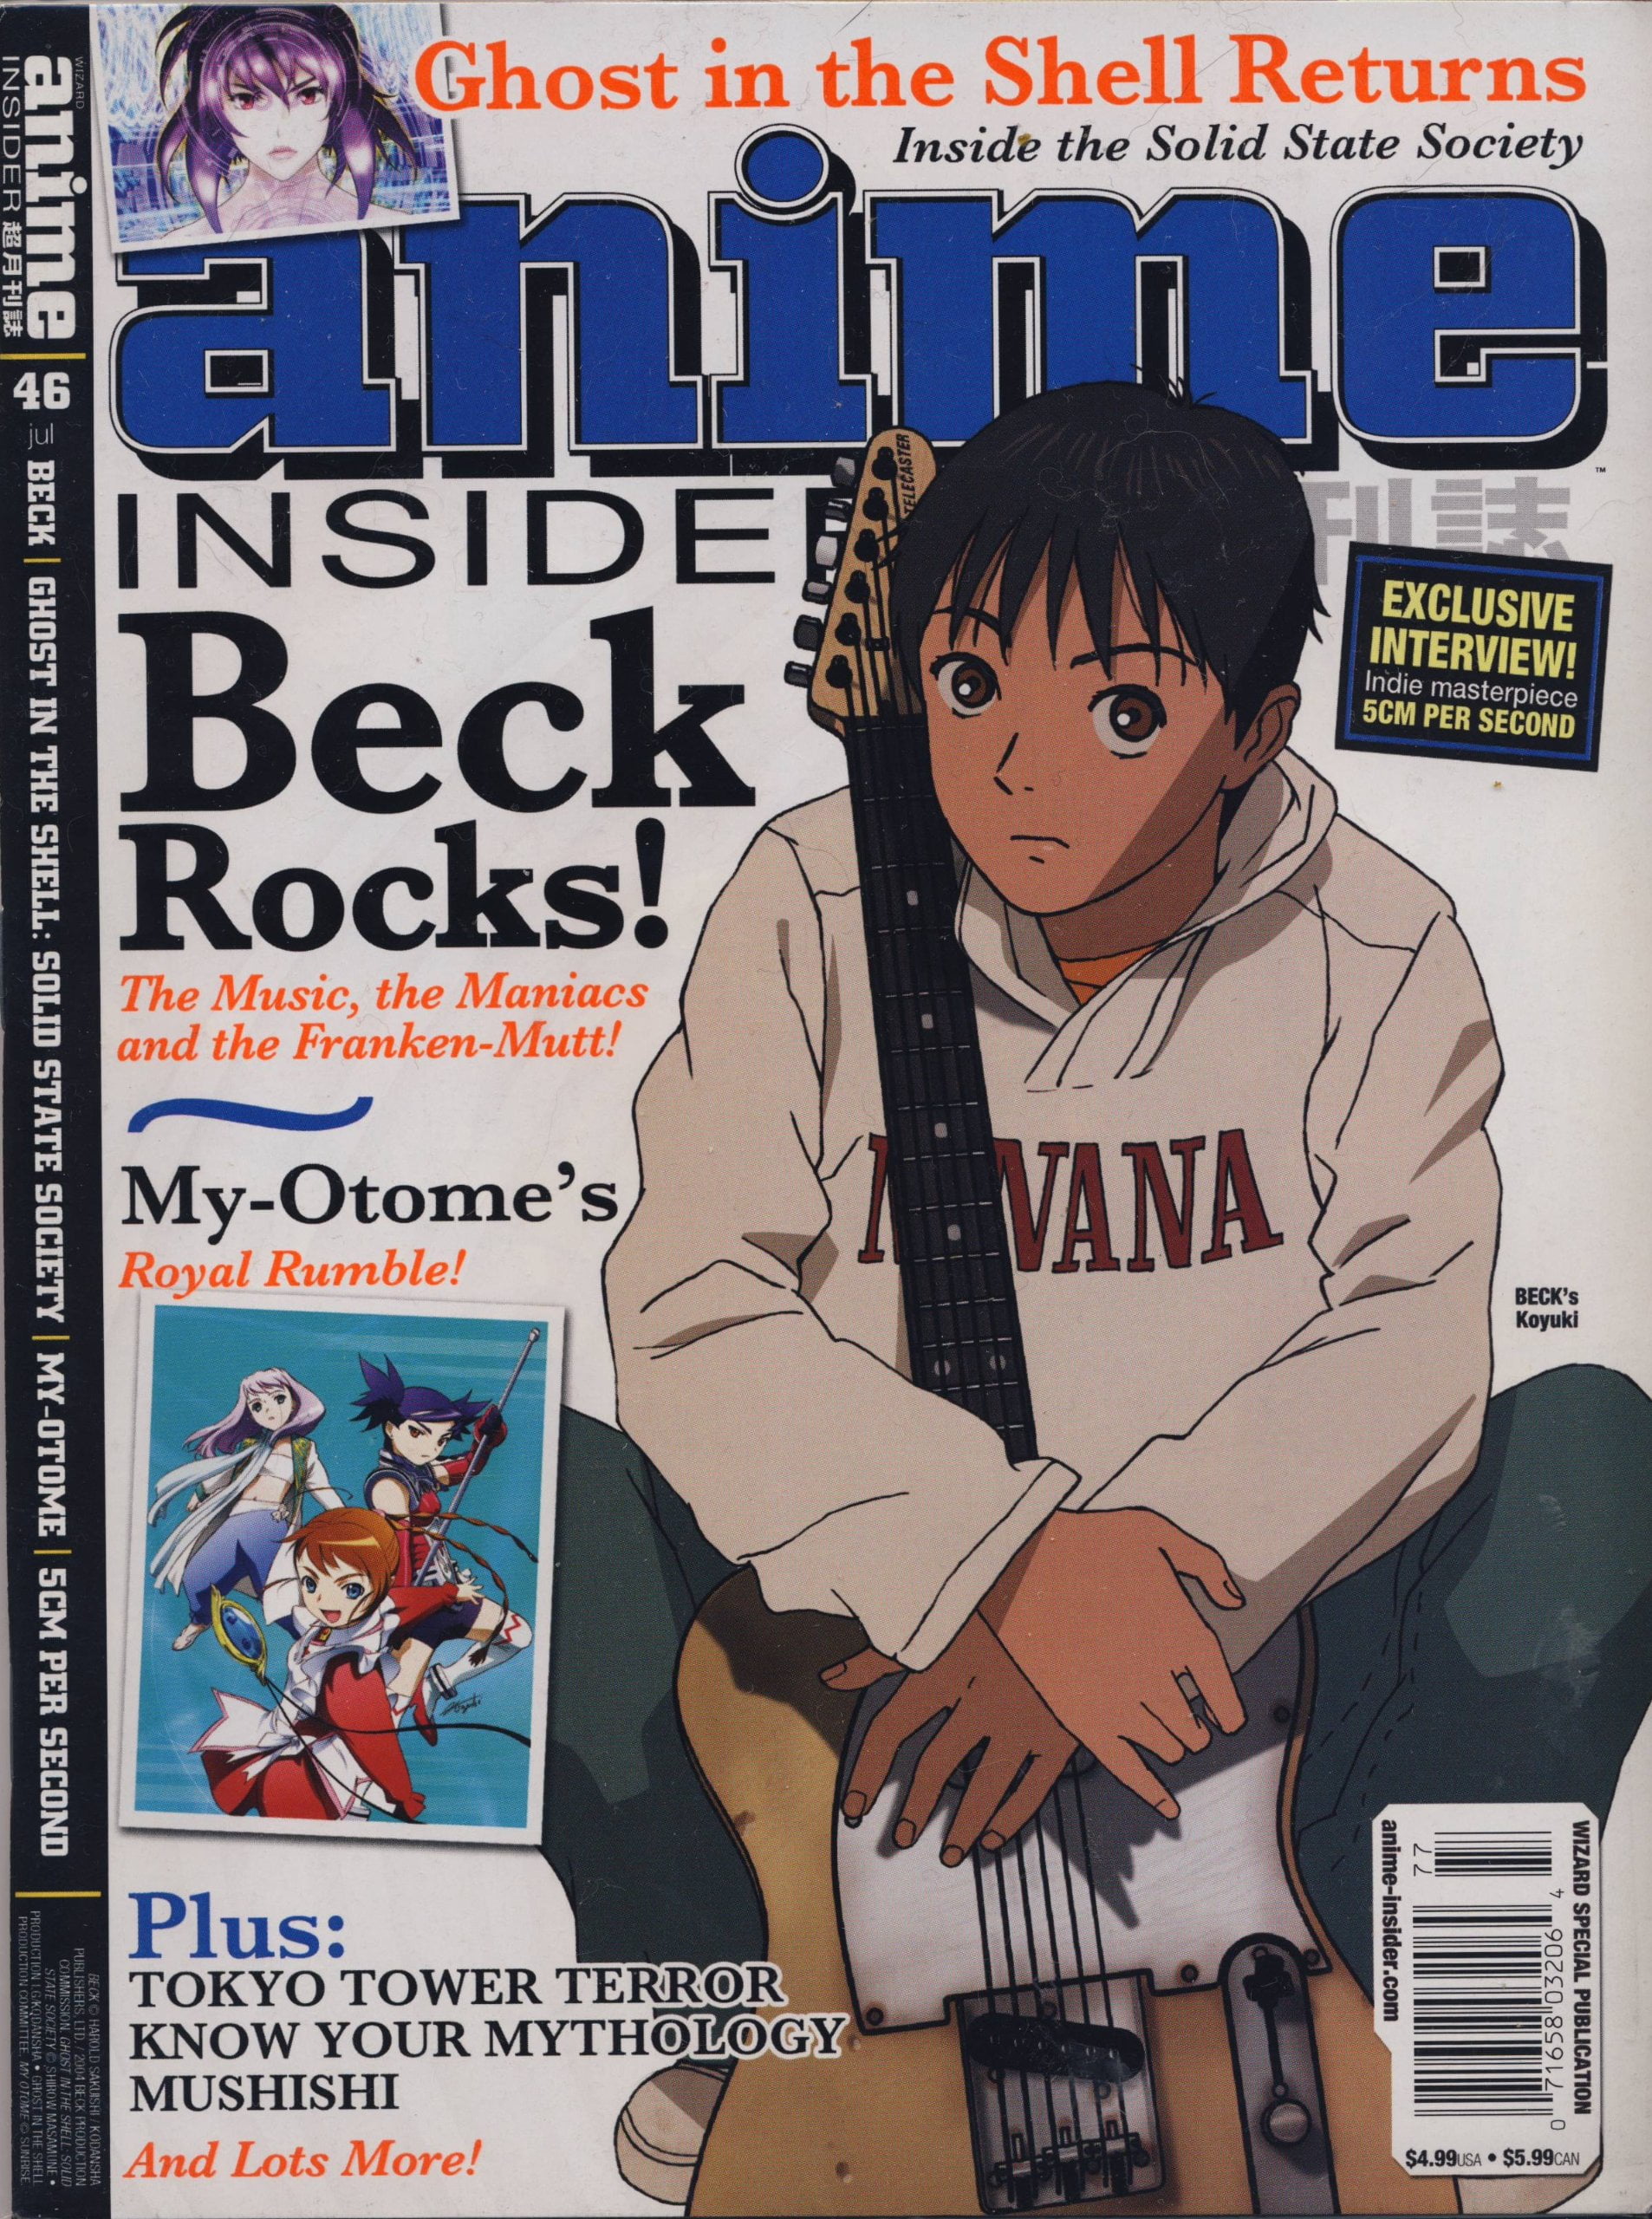 From an old issue of anime insider